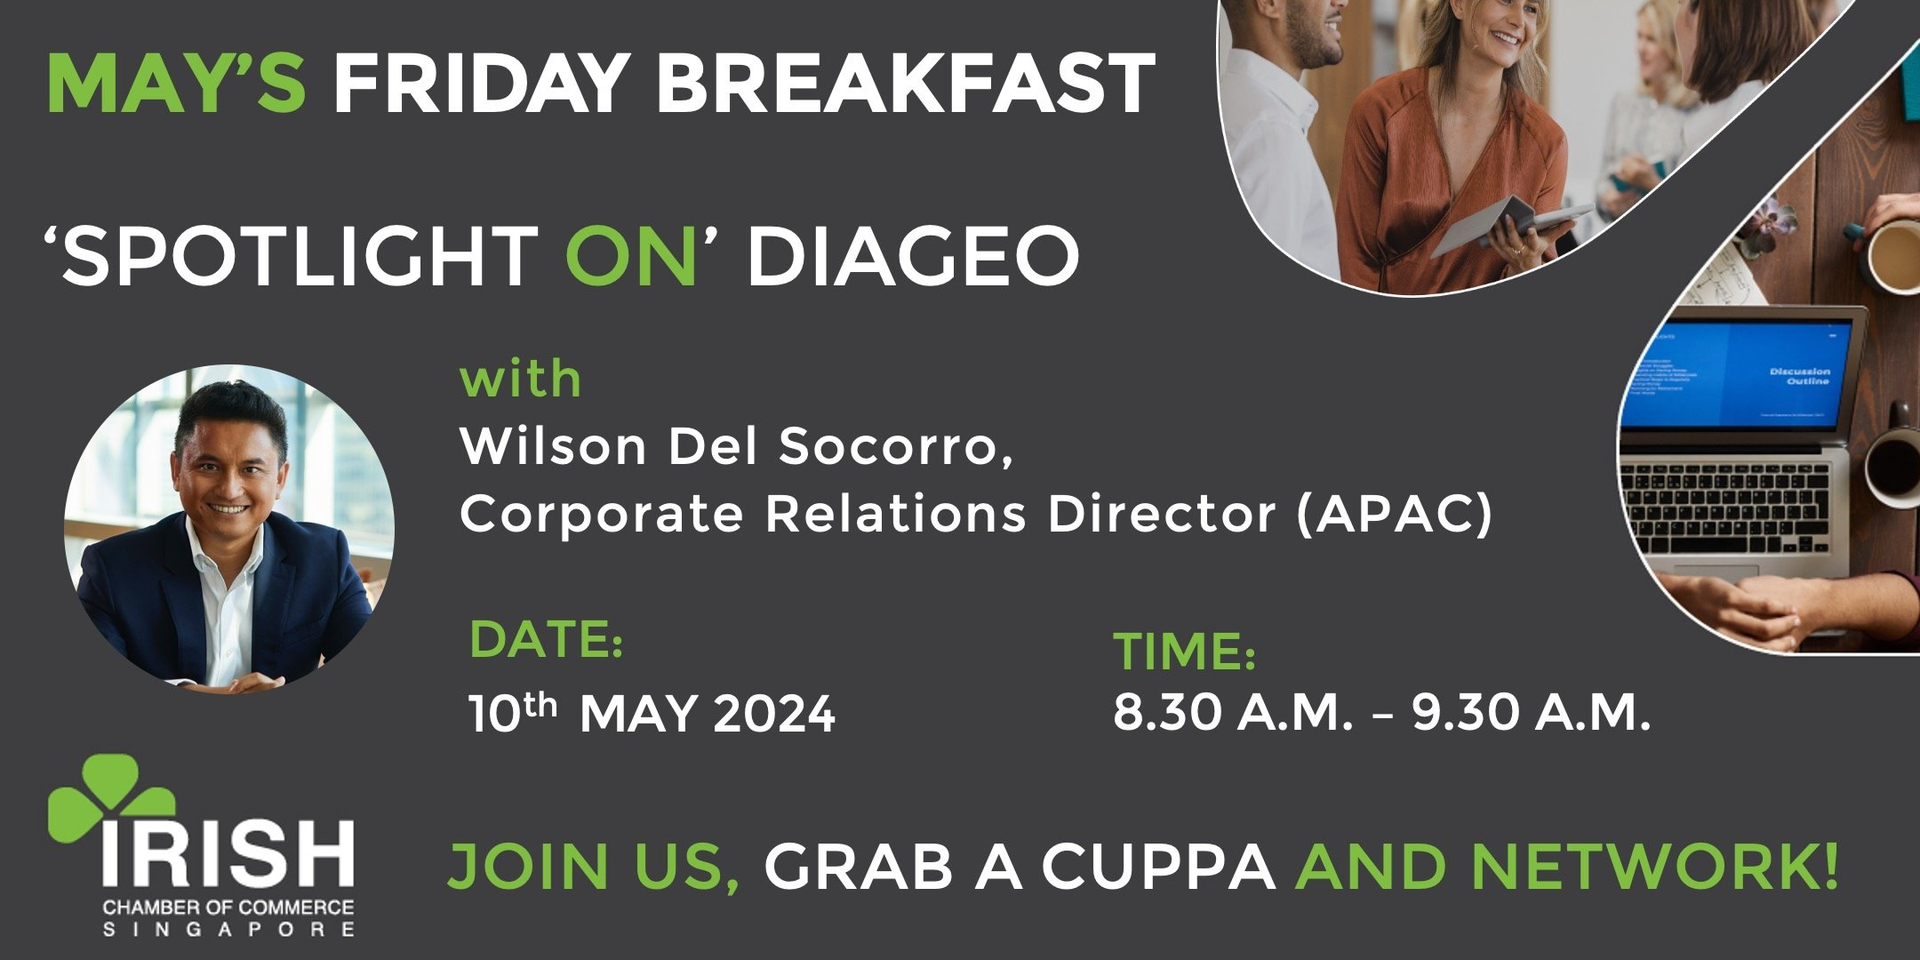 thumbnails May's Friday Breakfast with Diageo - 10th May